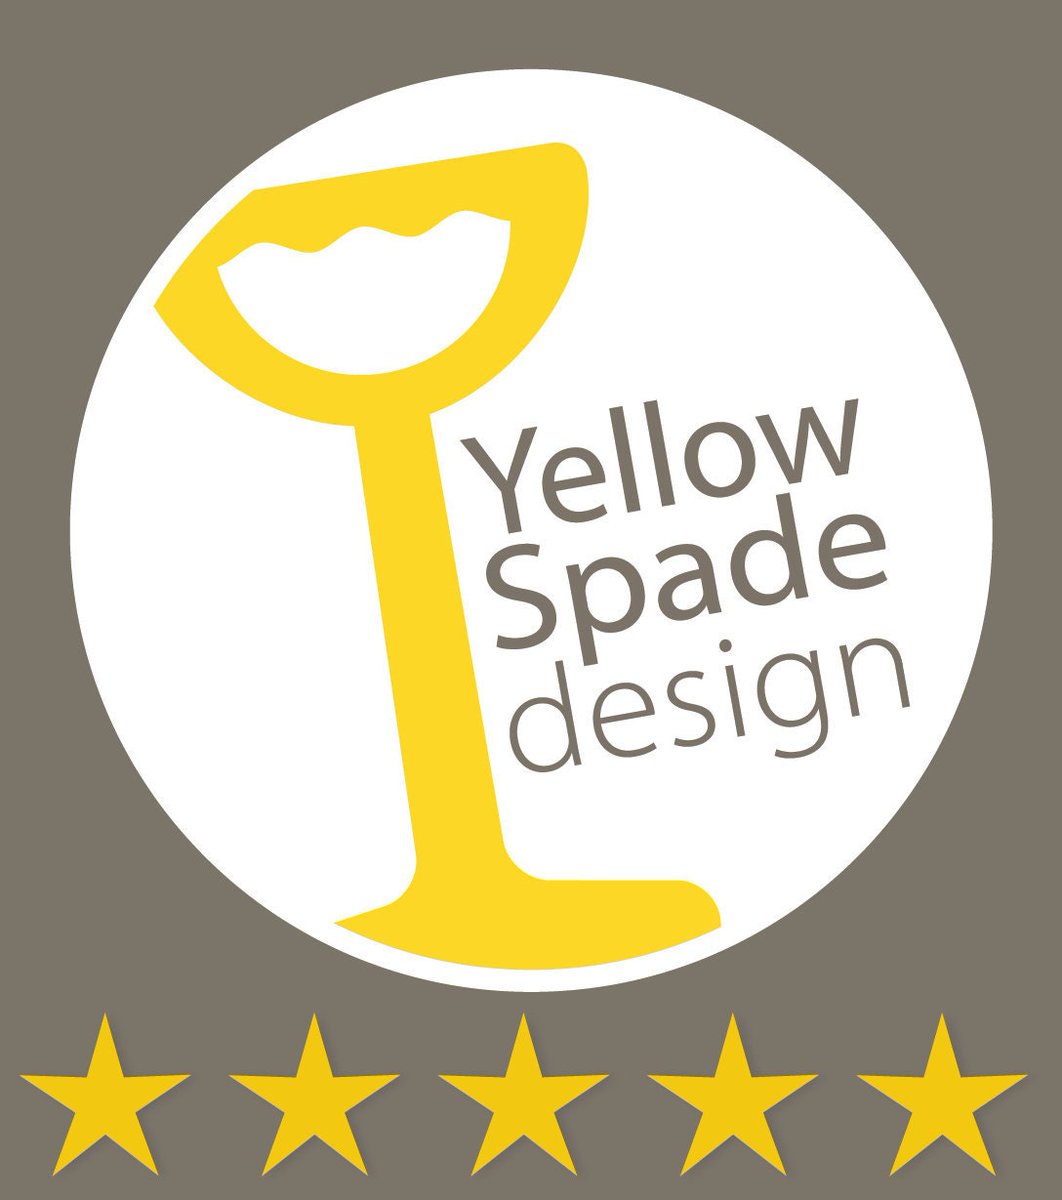 I've now earned 152 five-star reviews on Etsy.  Nothing makes me prouder of YSD than another happy customer.  Thank you so much! etsy.com/uk/shop/Yellow… #personalisedgifts #printedgifts